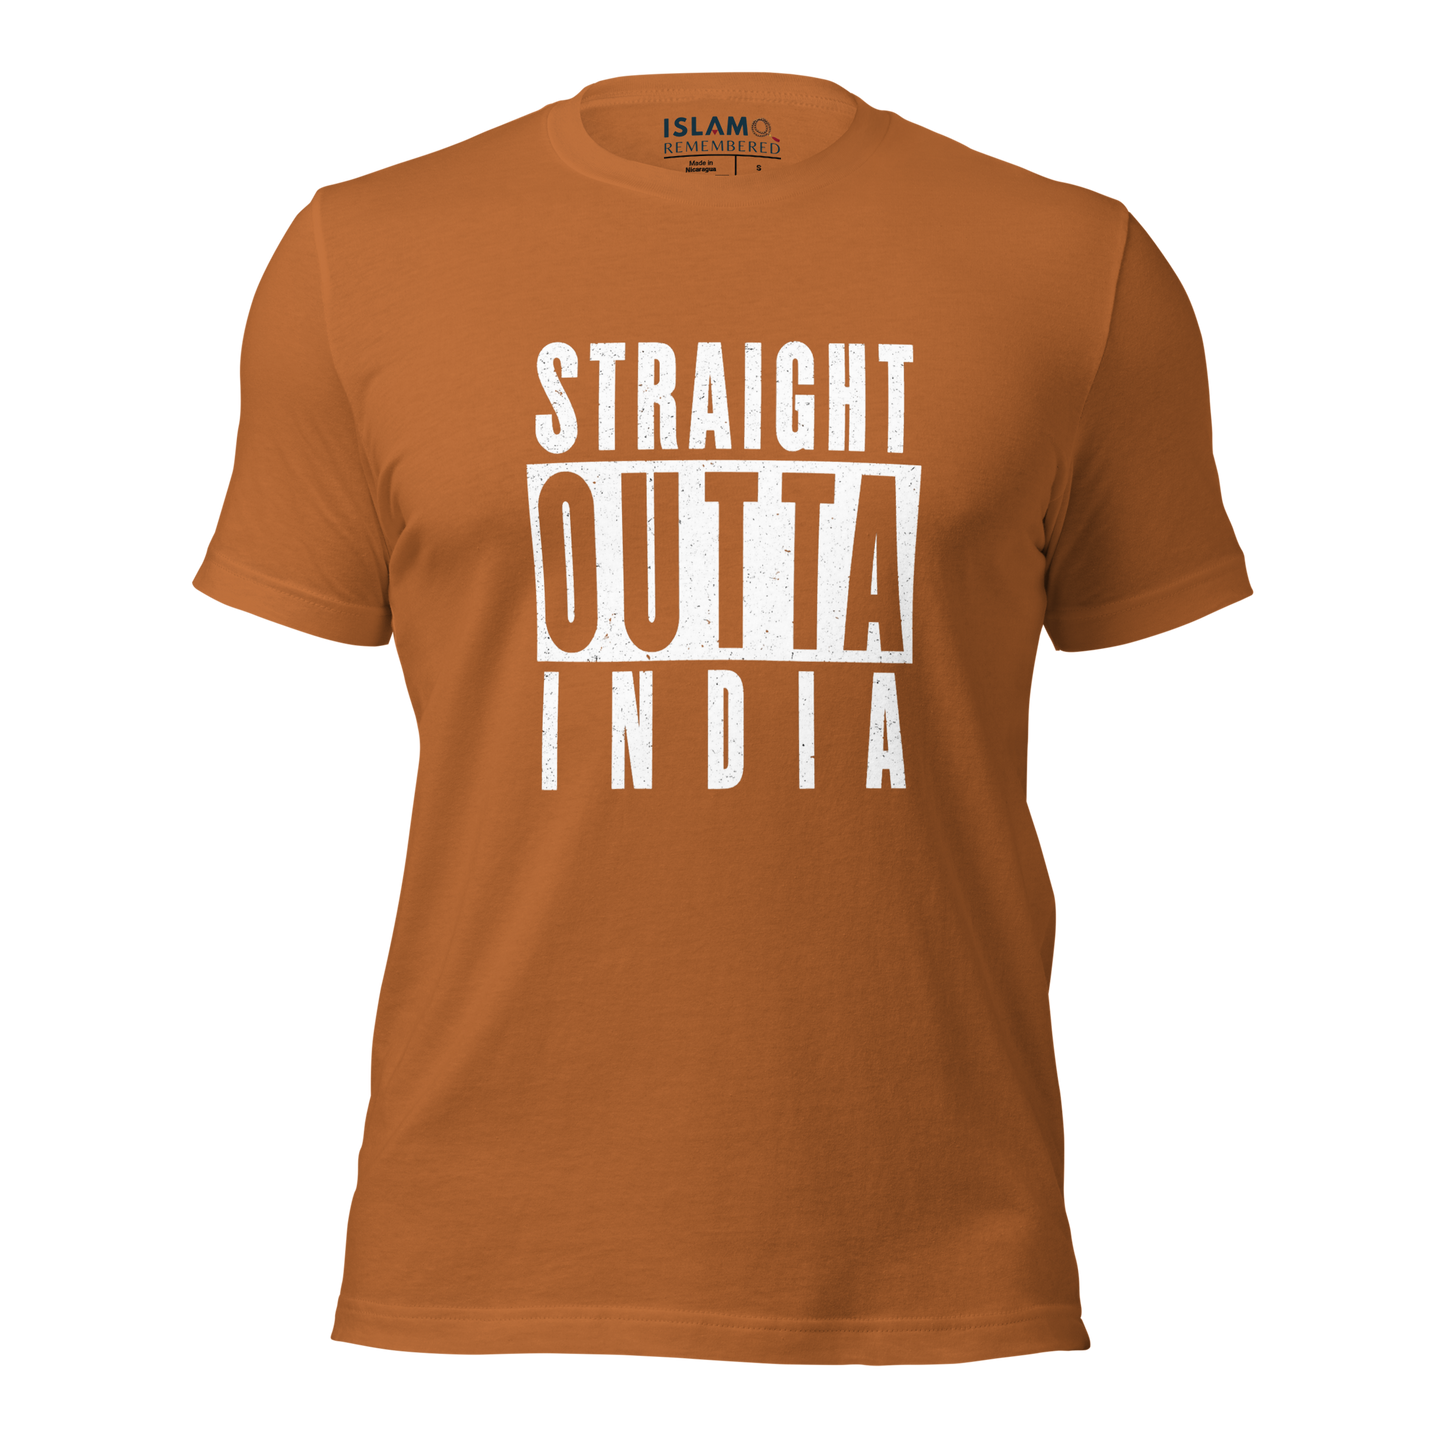 ADULT T-Shirt - STRAIGHT OUTTA INDIA